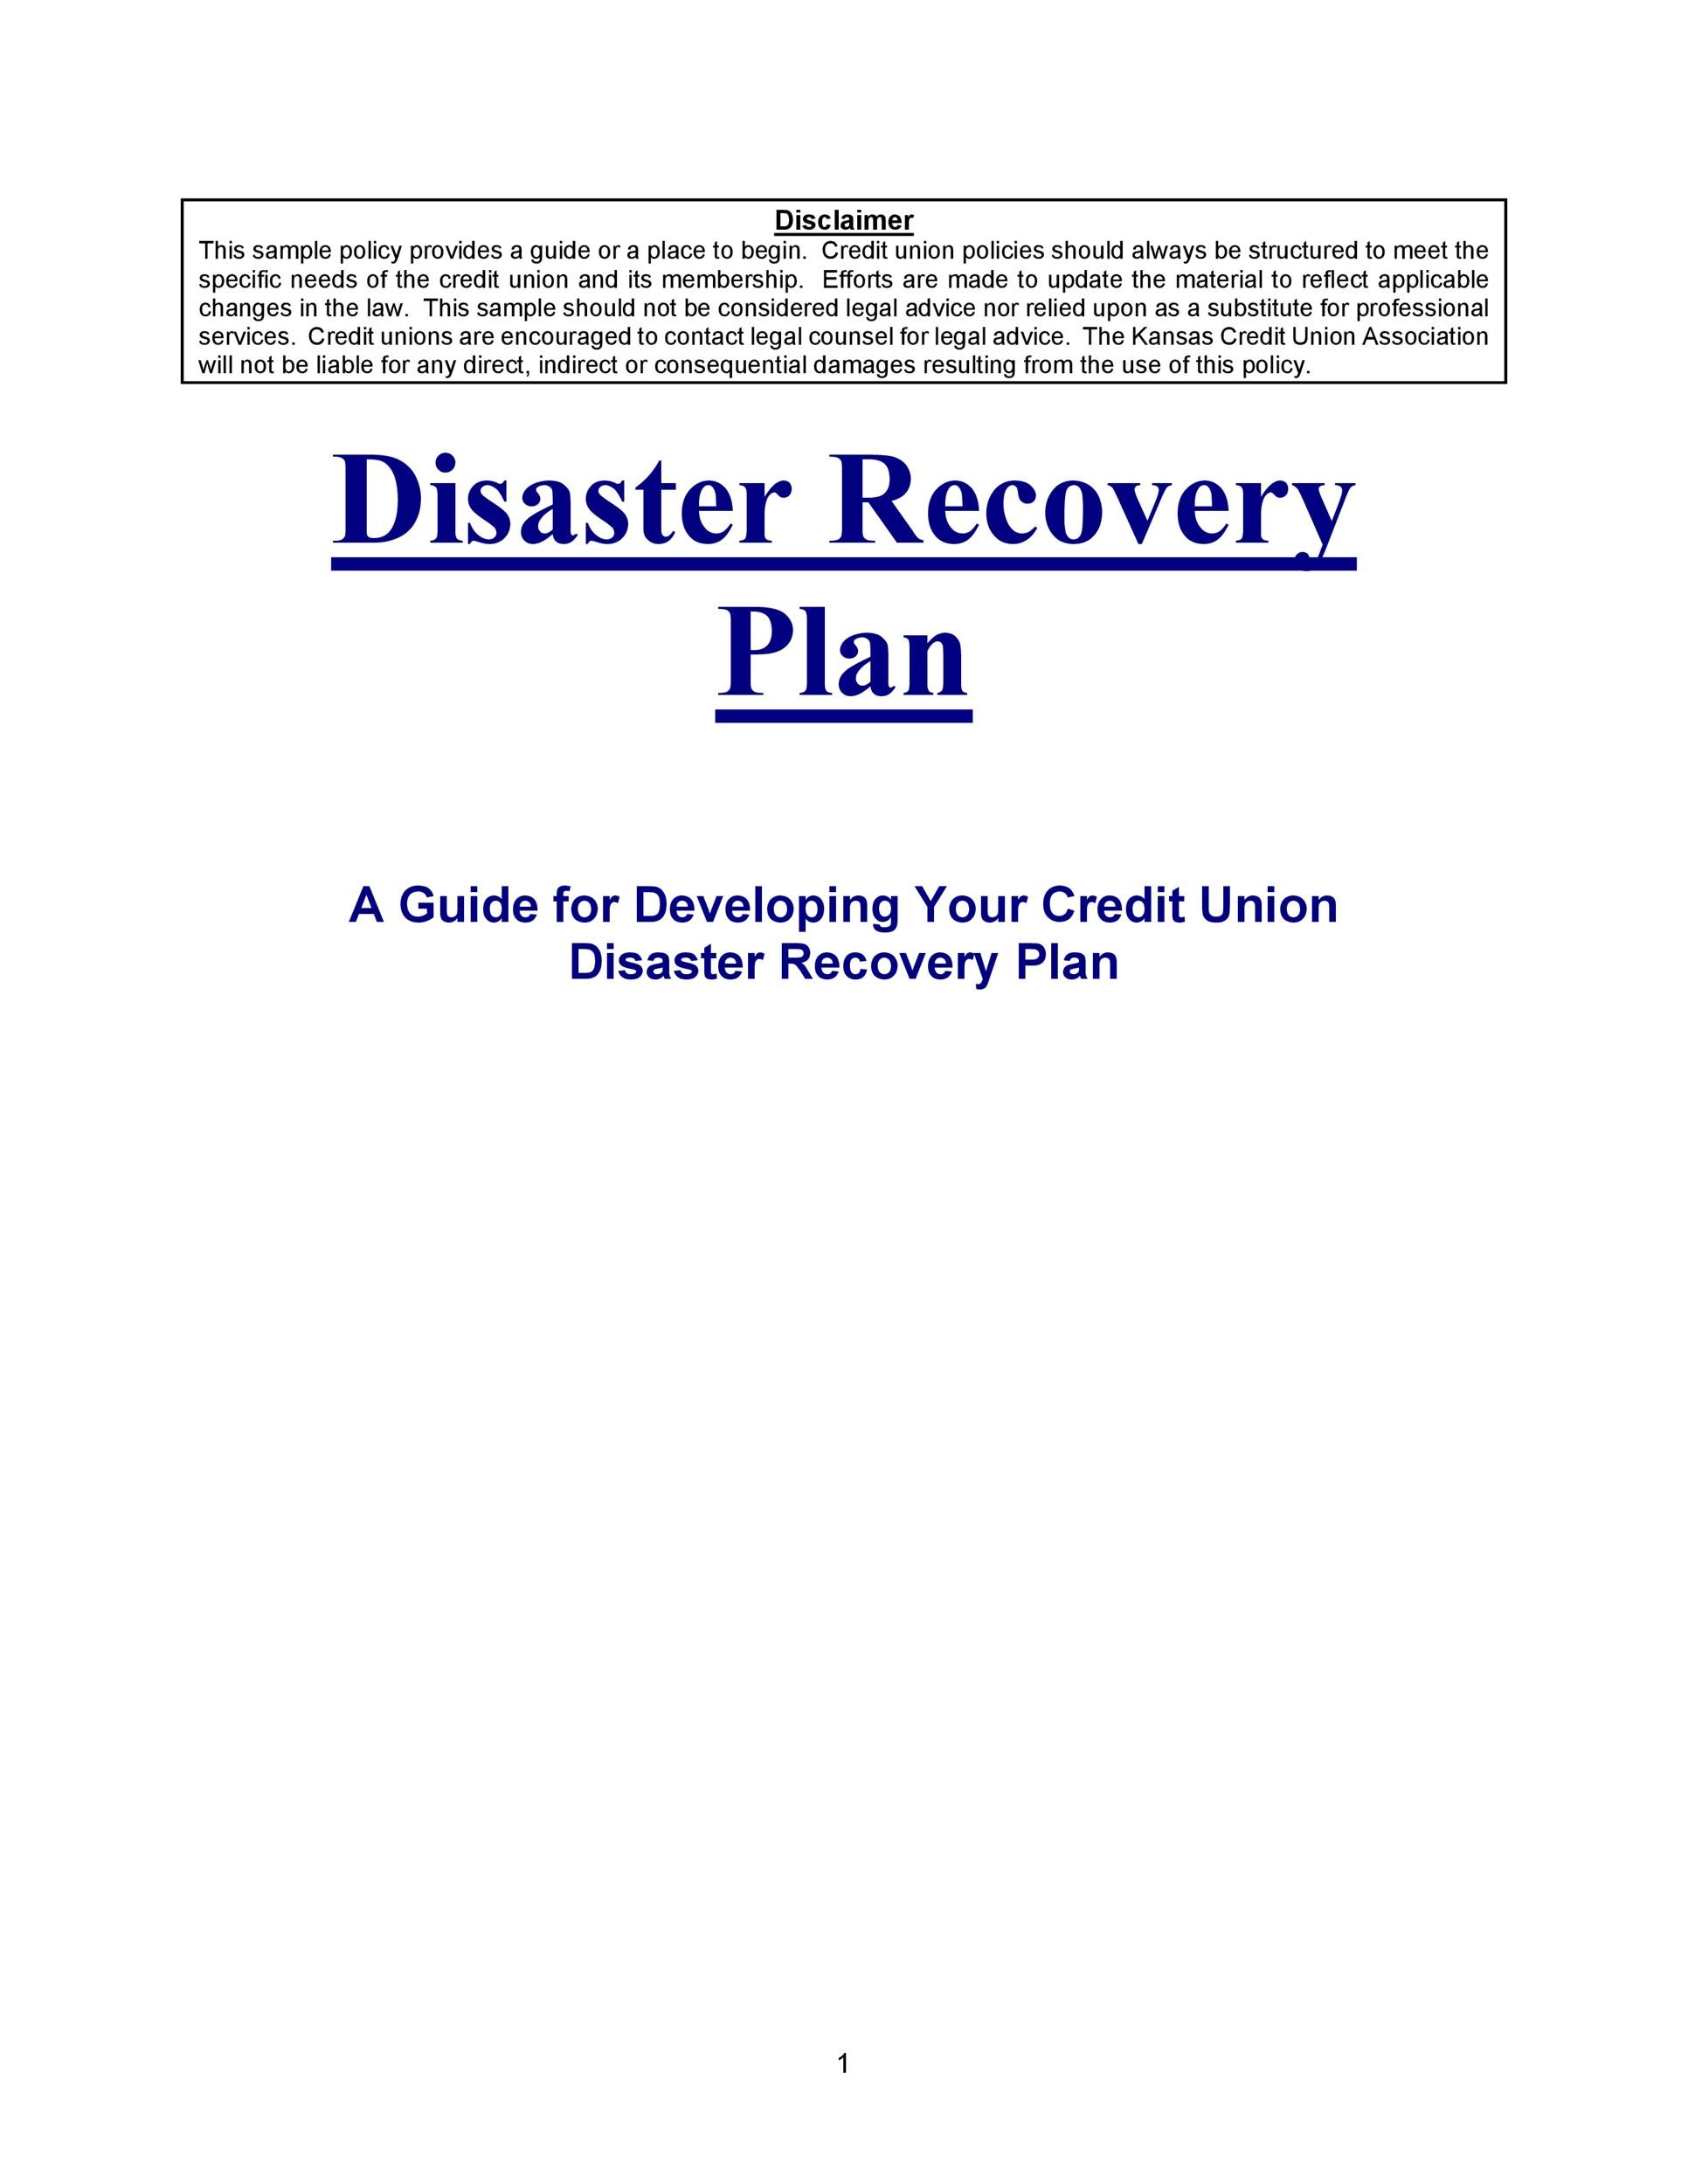 52 Effective Disaster Recovery Plan Templates [DRP] ᐅ TemplateLab